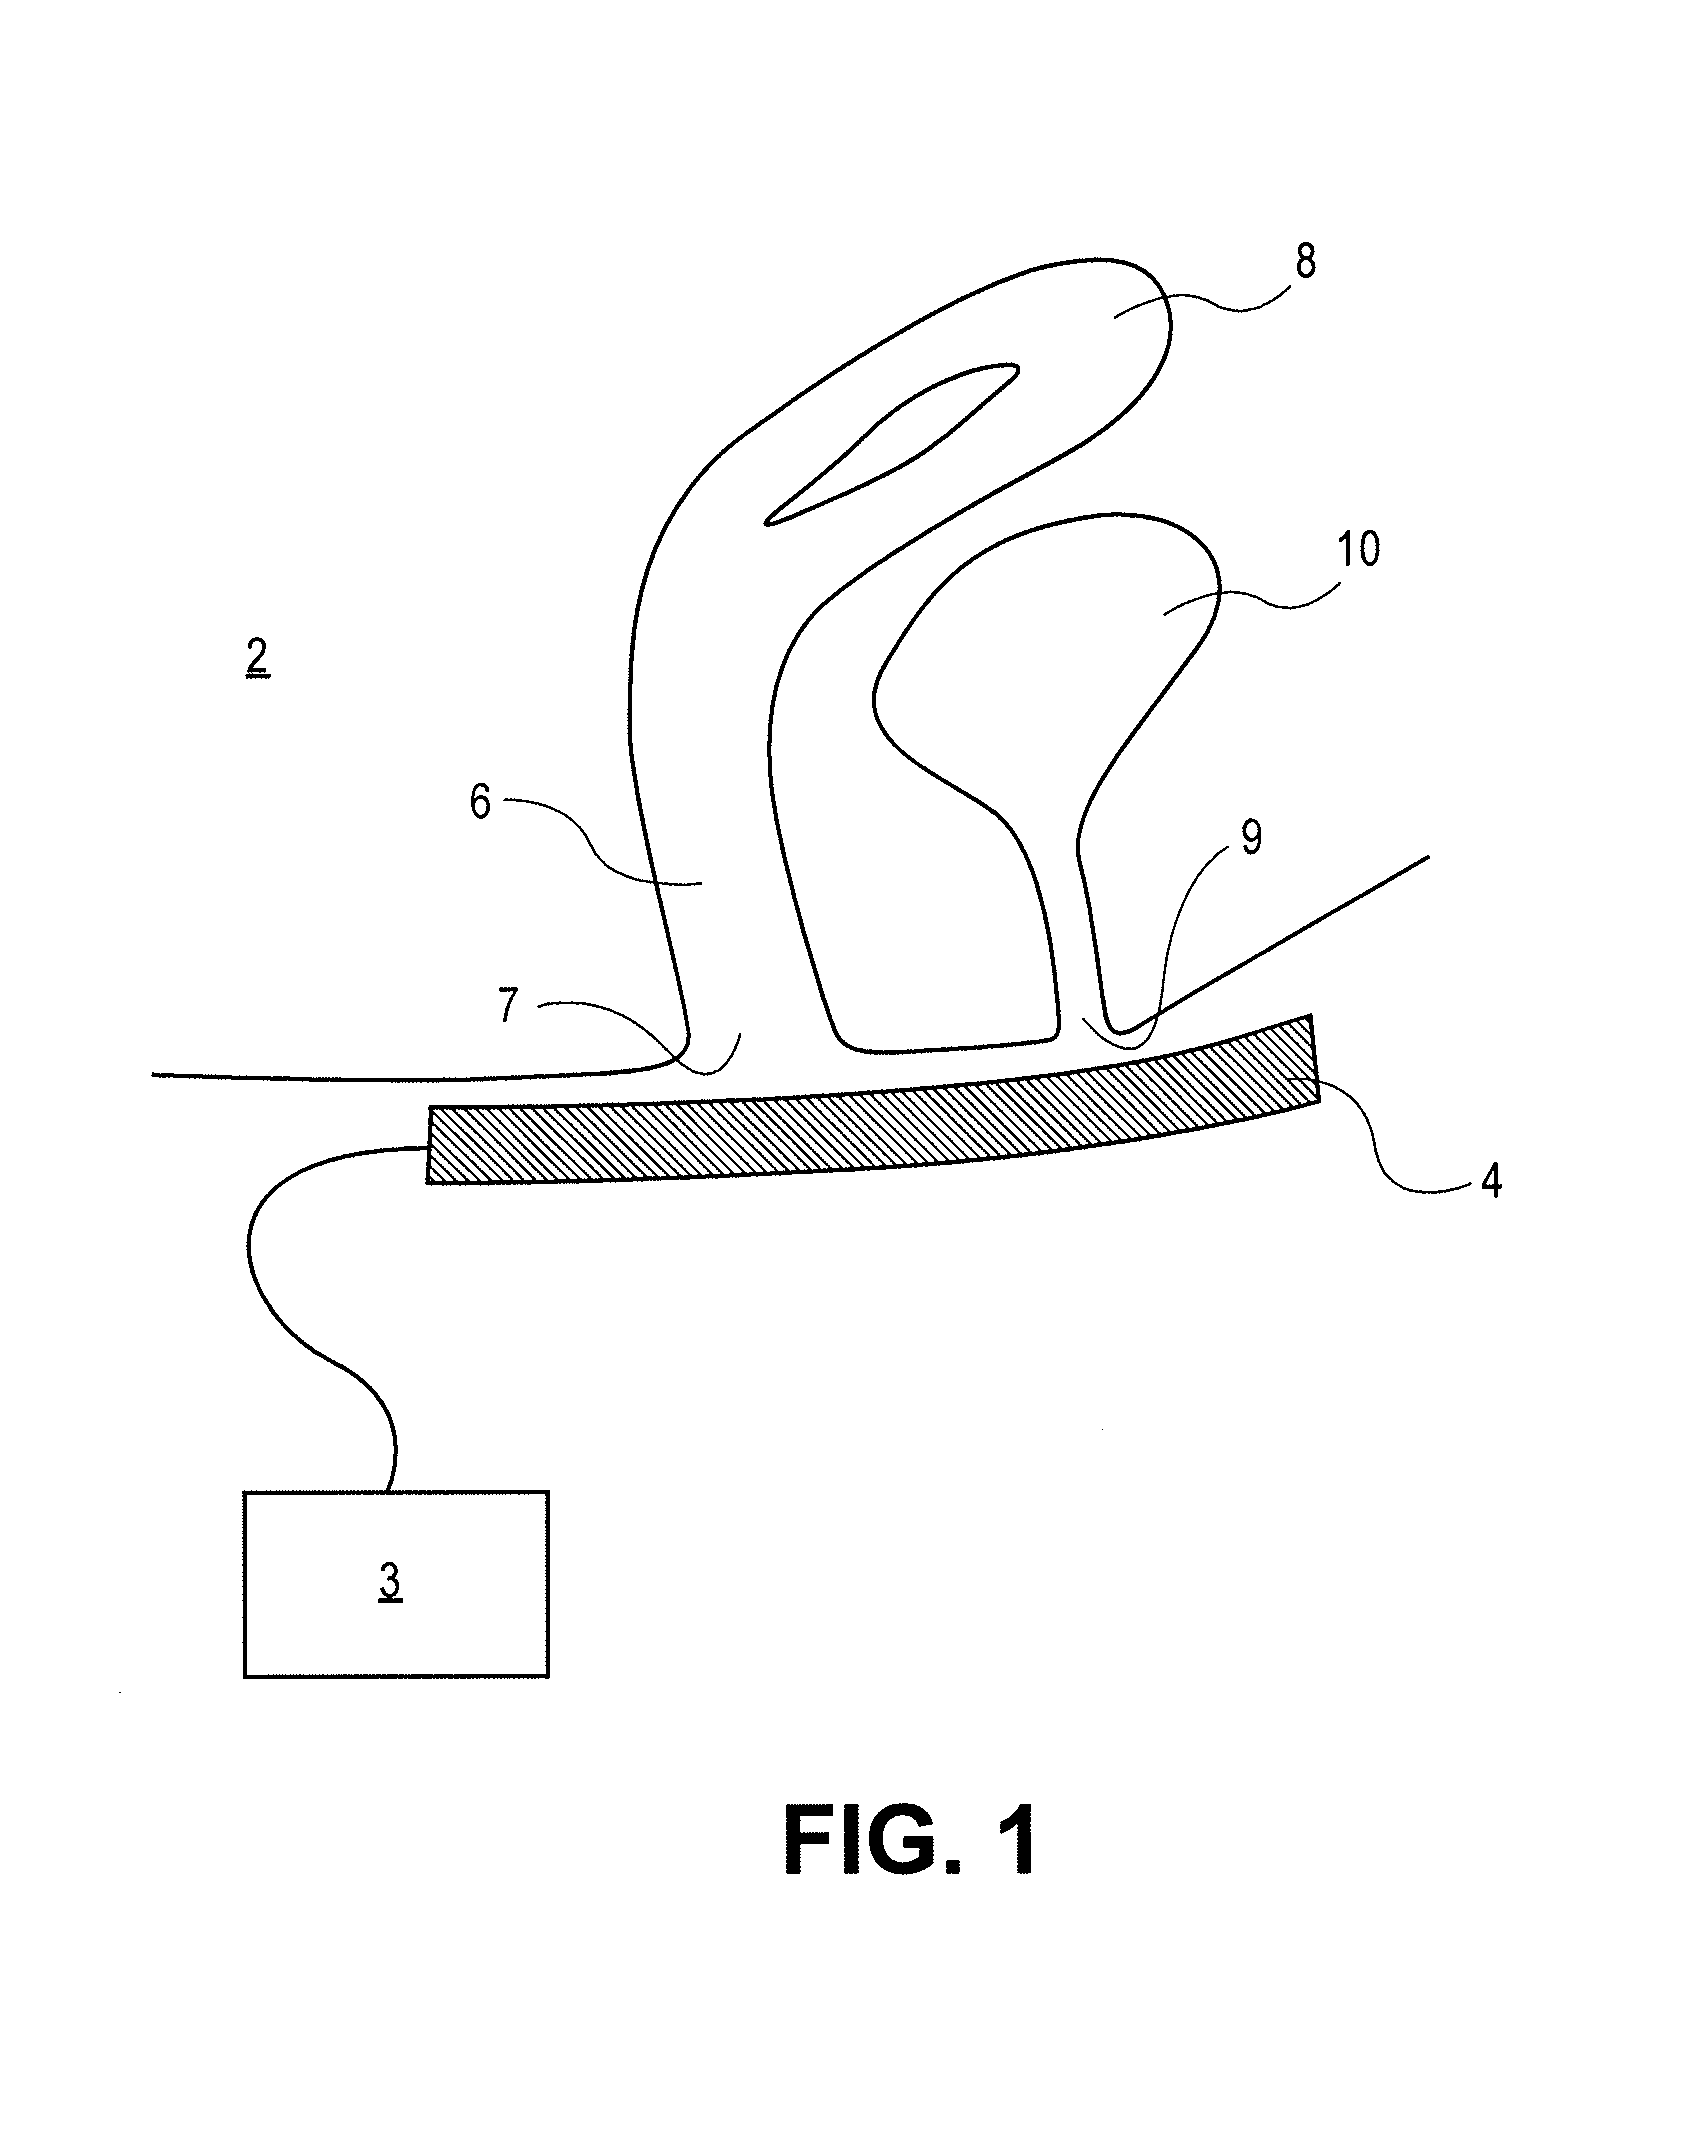 Device and method to treat vaginal atrophy